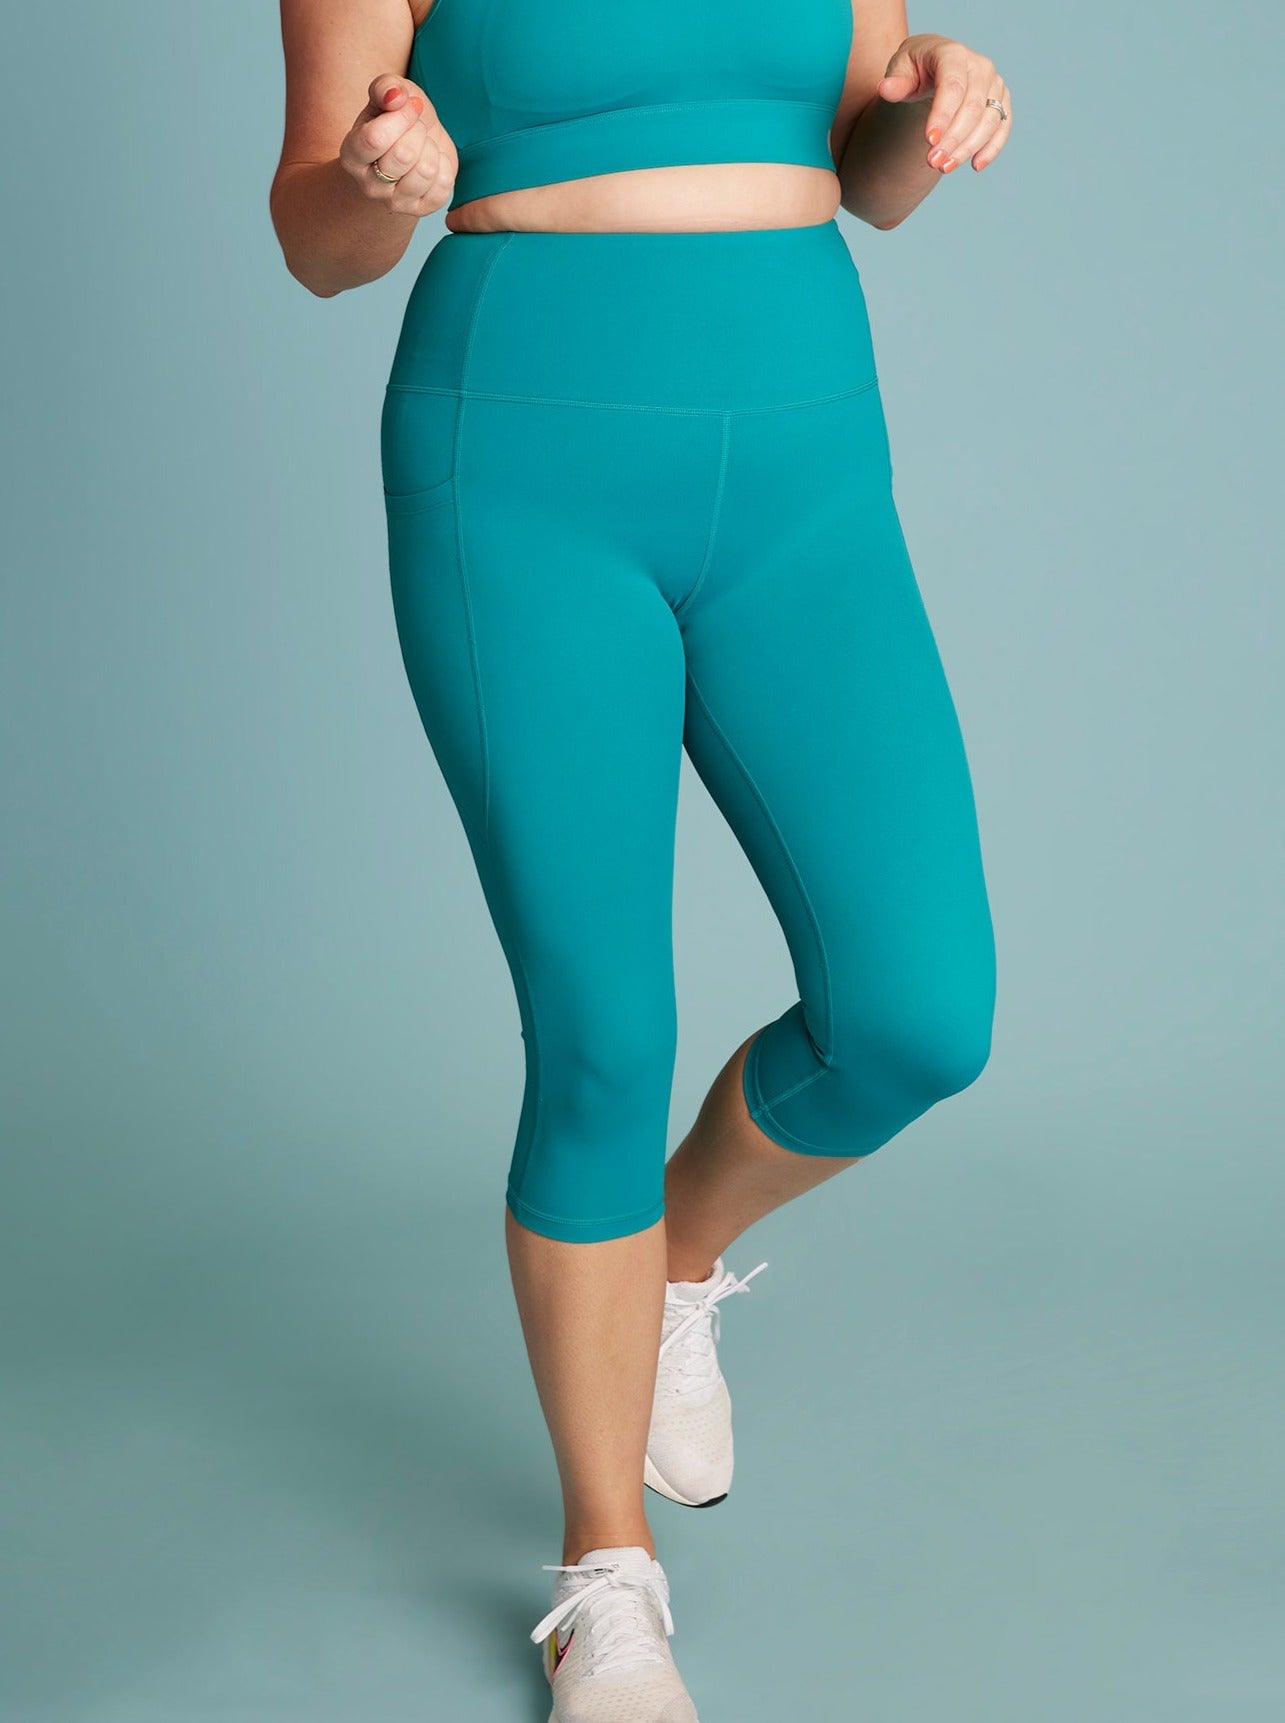 Buy Indo Fab Women and Girls Slim Fit Ankle Length Leggings (L, Teal Green)  at